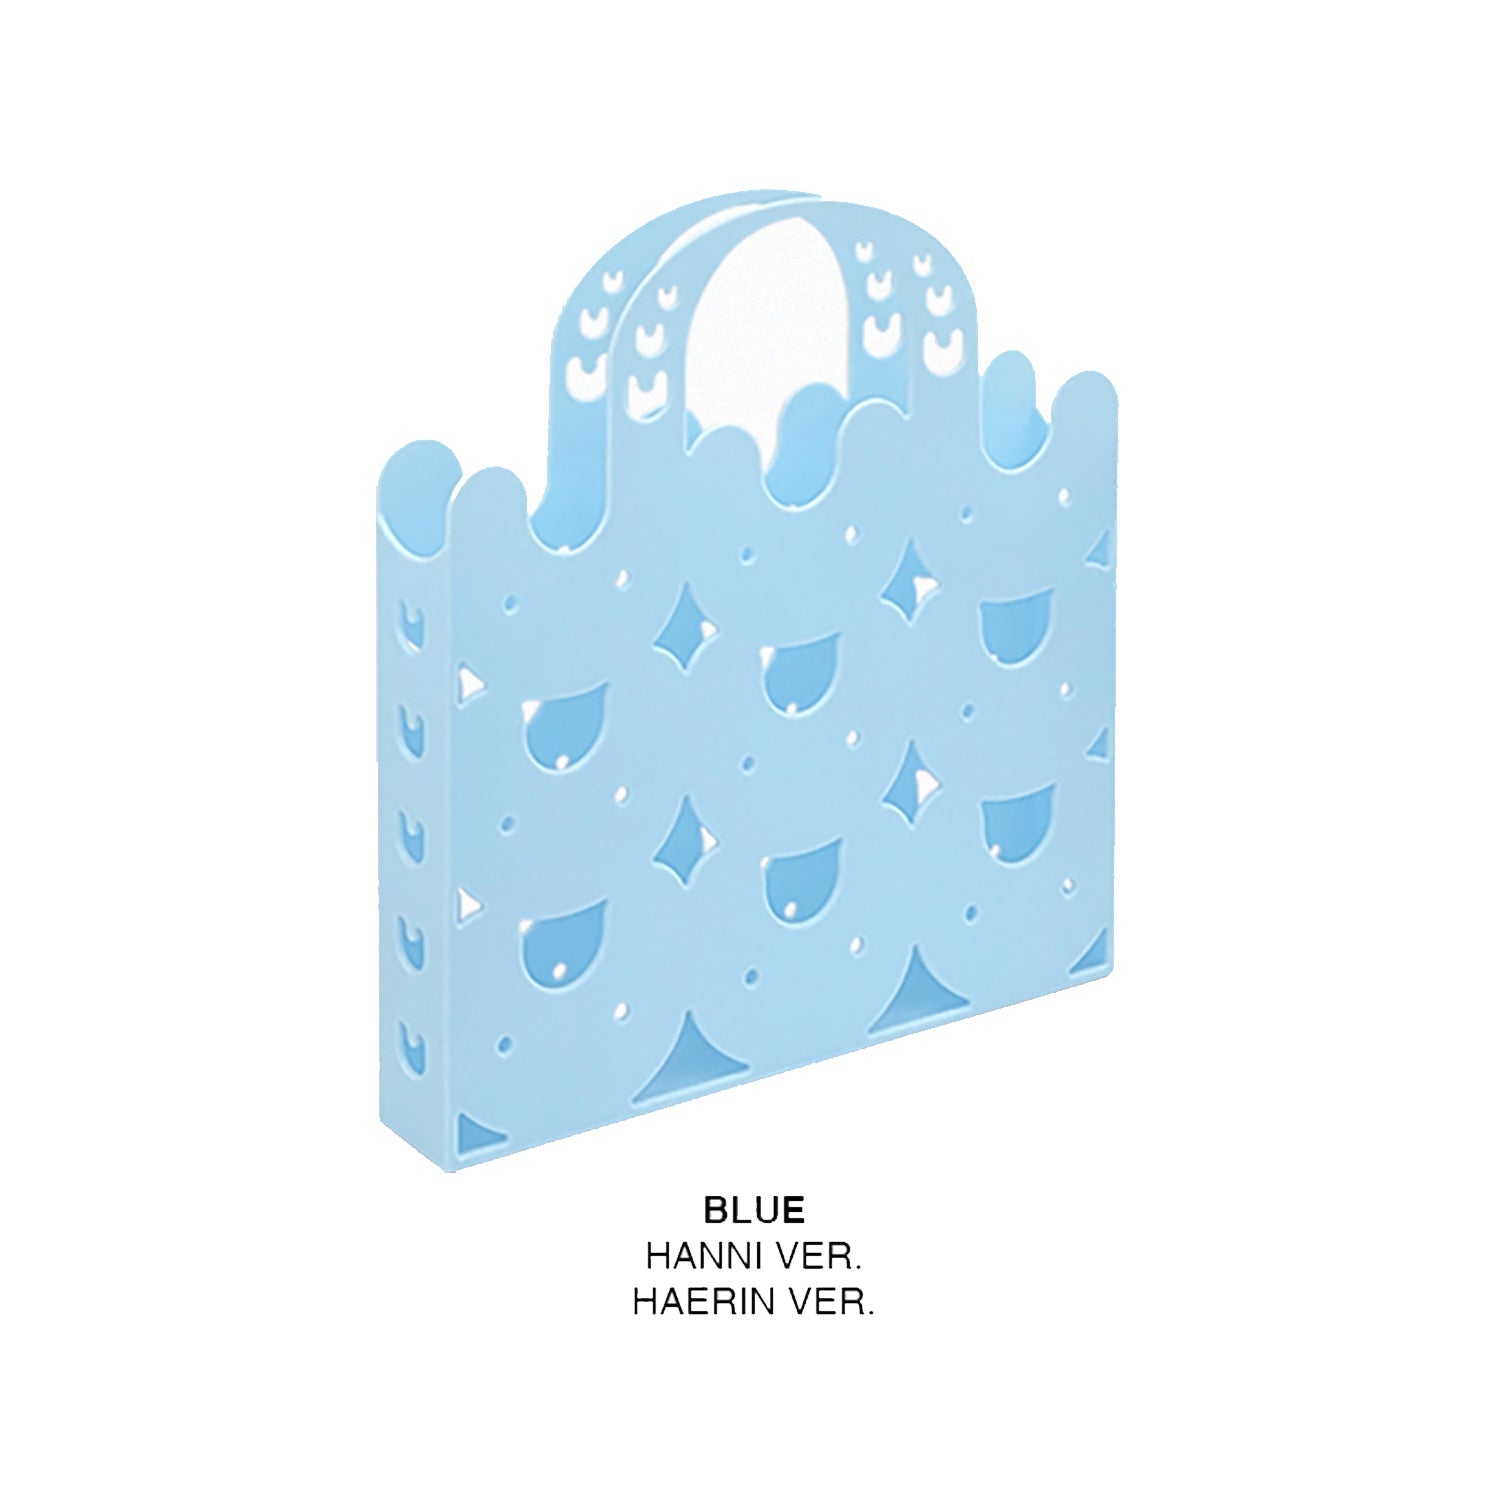 NEWJEANS 2ND EP ALBUM 'GET UP' (BUNNY BEACH BAG) BLUE VERSION COVER